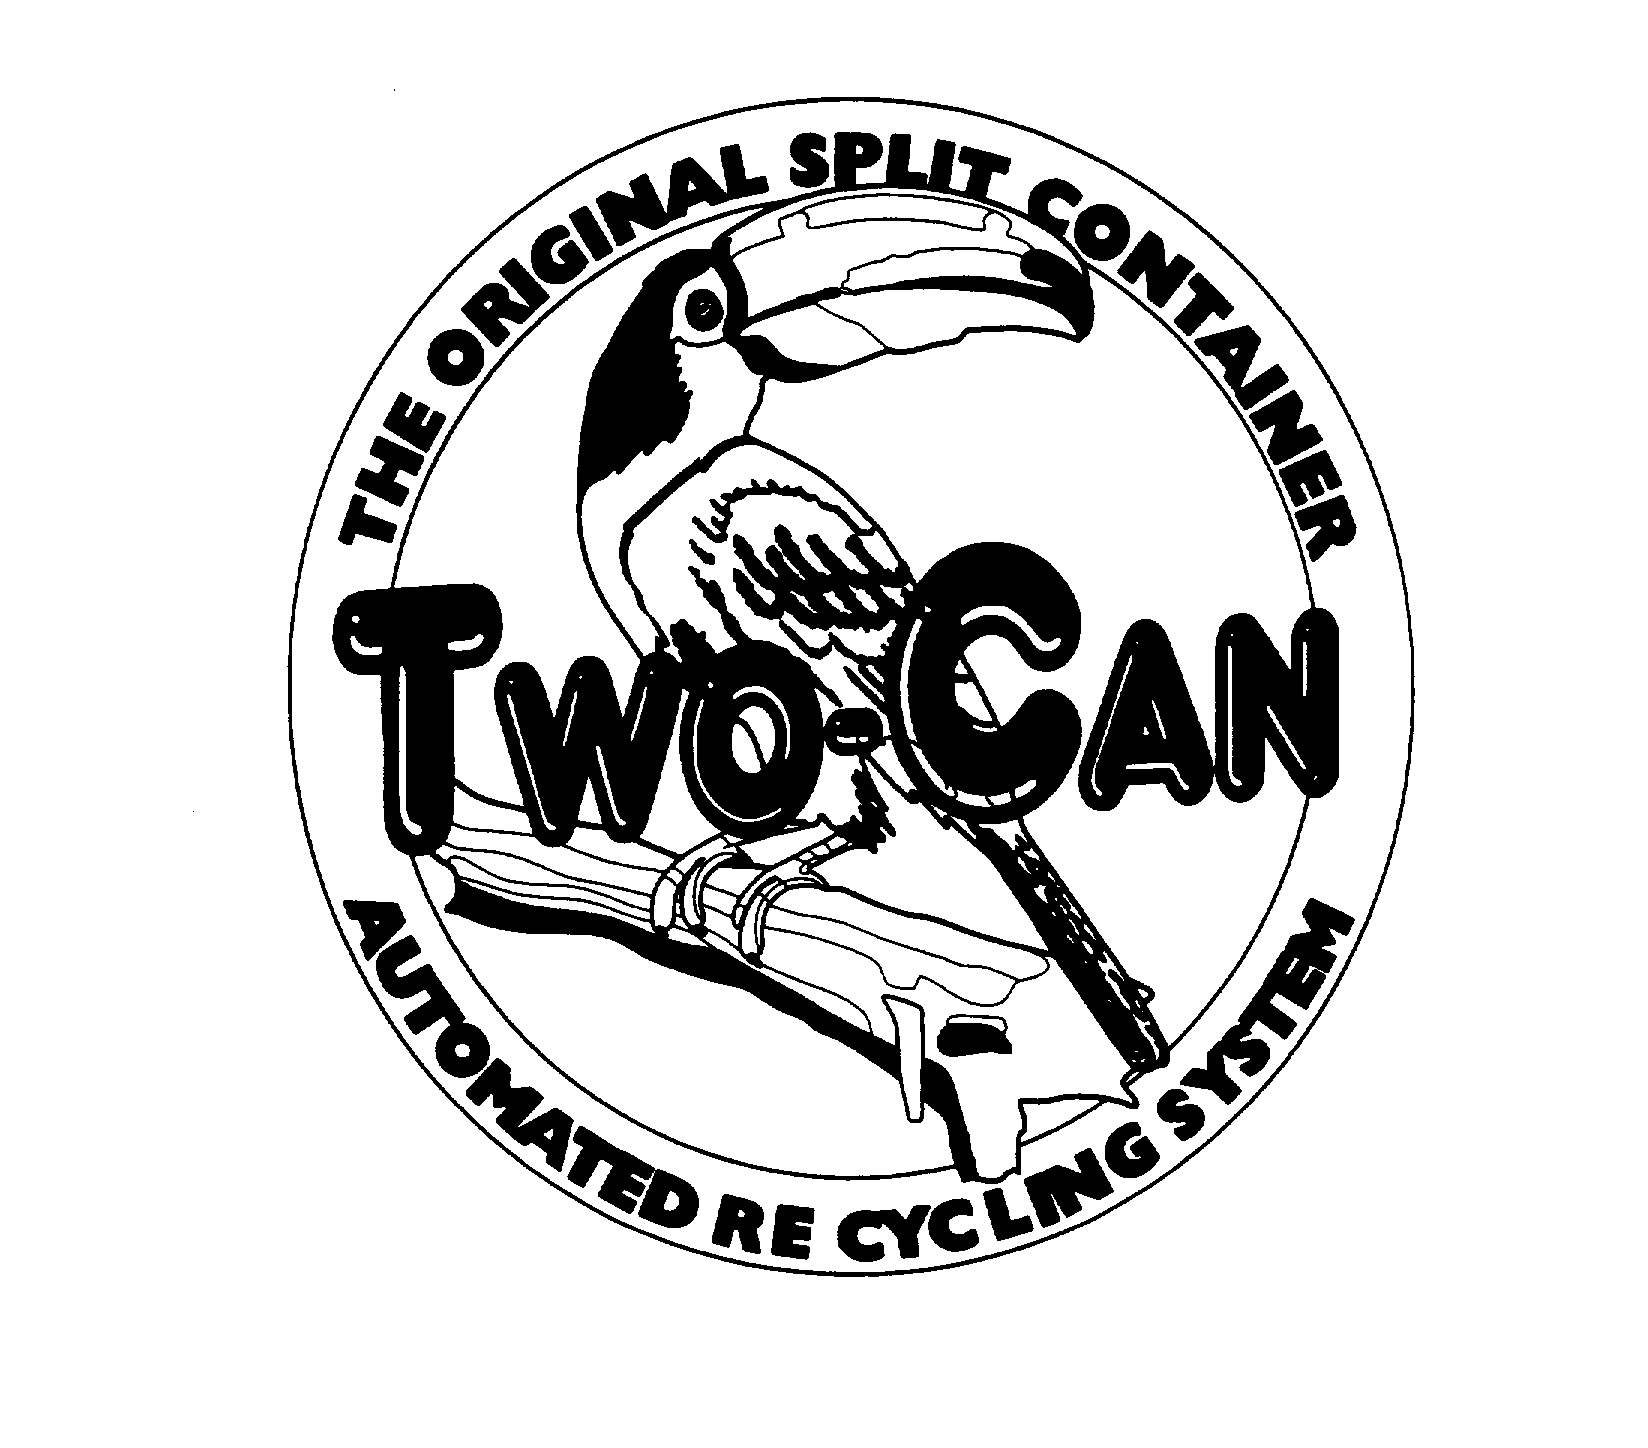  TWO-CAN THE ORIGINAL SPLIT CONTAINER AUTOMATED RE CYCLING SYSTEM